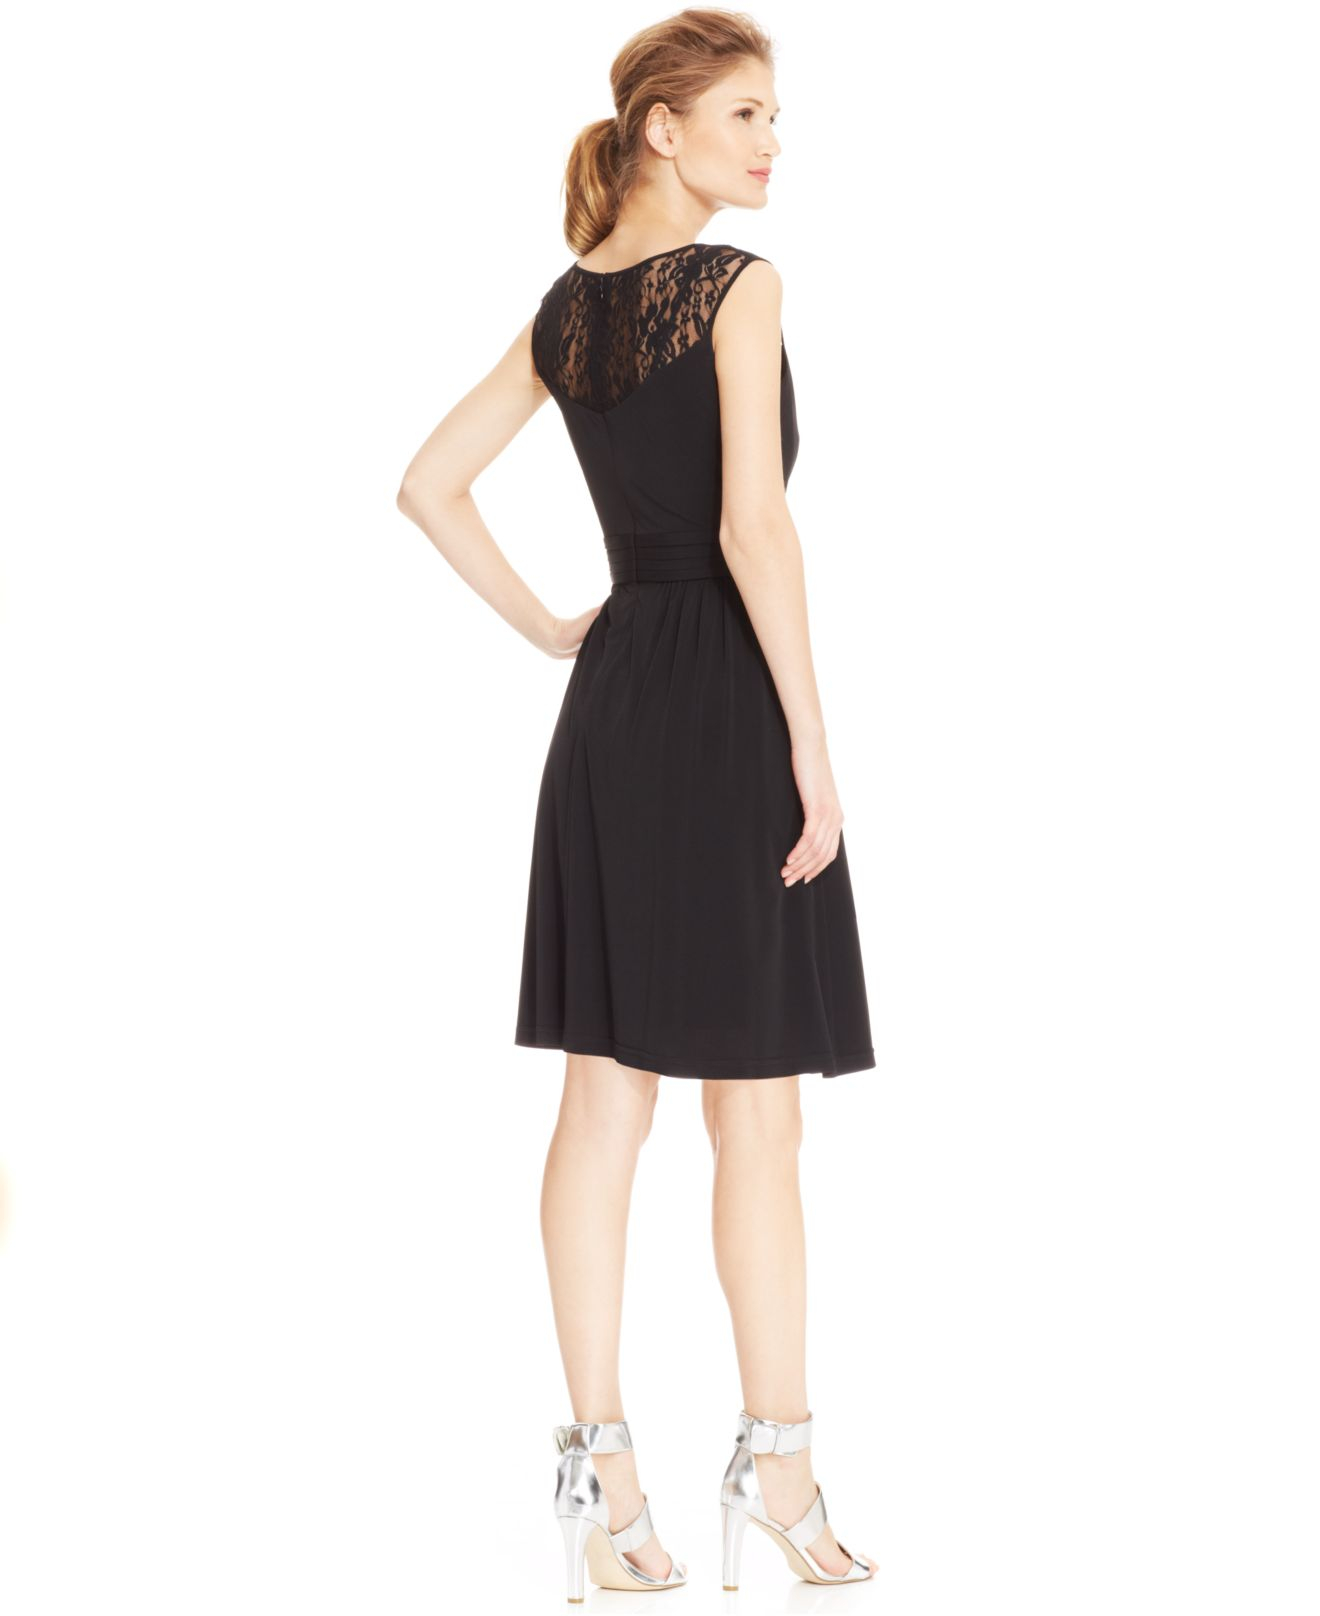 Lyst - Ellen Tracy Illusion-Lace Embellished Dress in Black